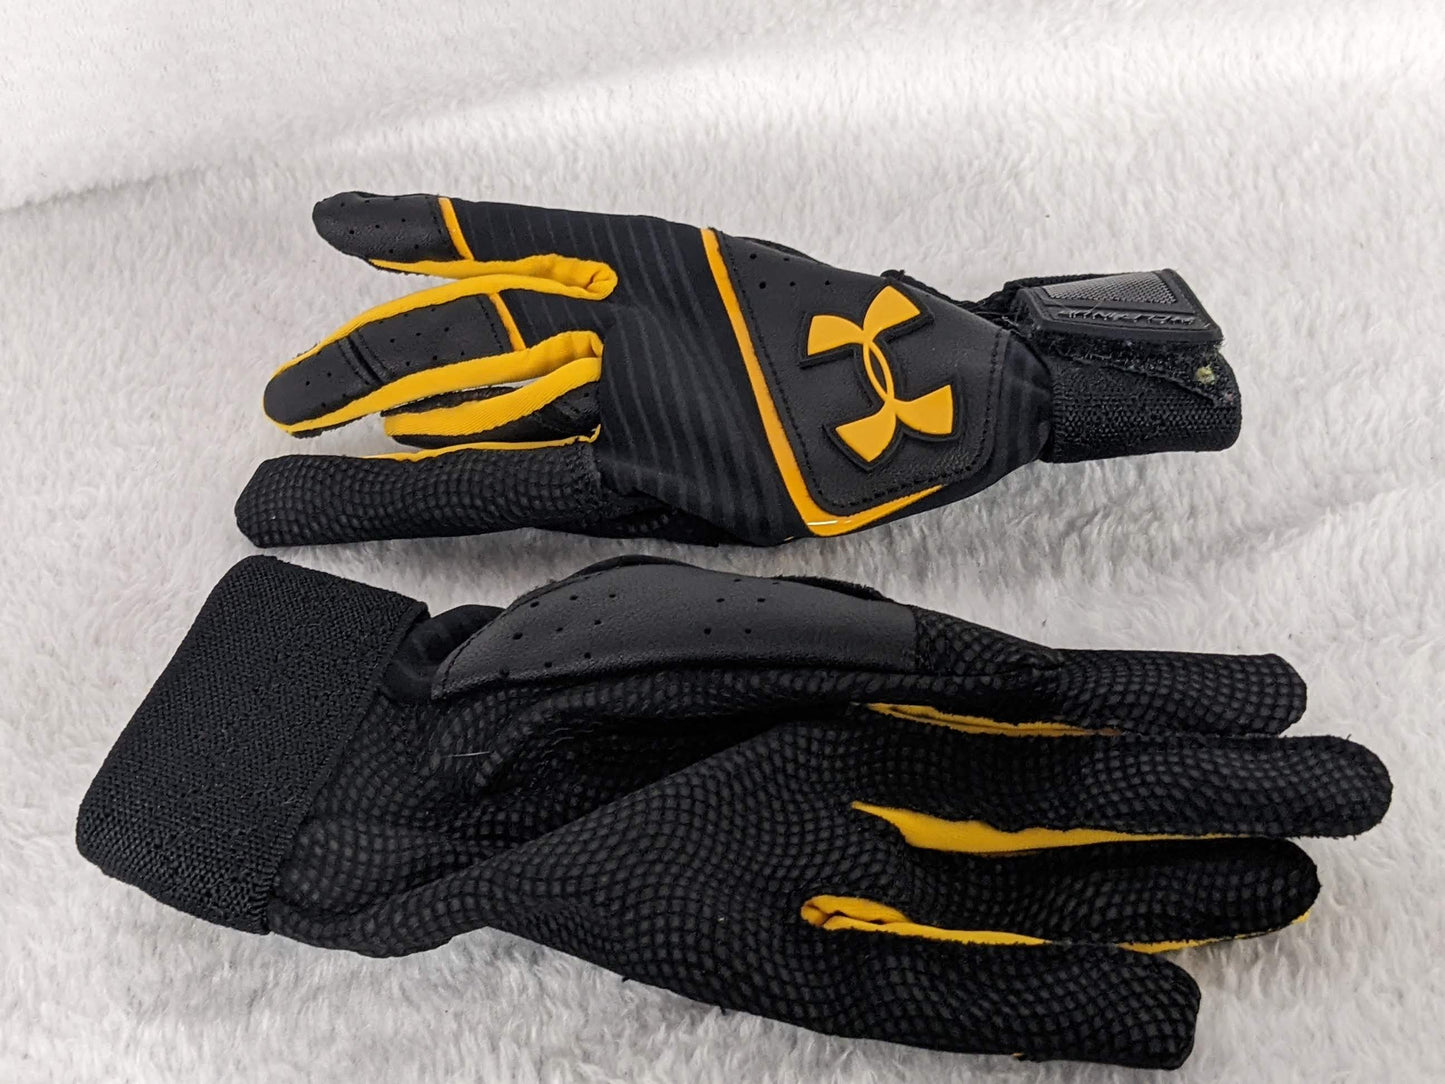 Under Armour Youth Batting Gloves Size Youth Small/Medium Color Yellow Condition Used